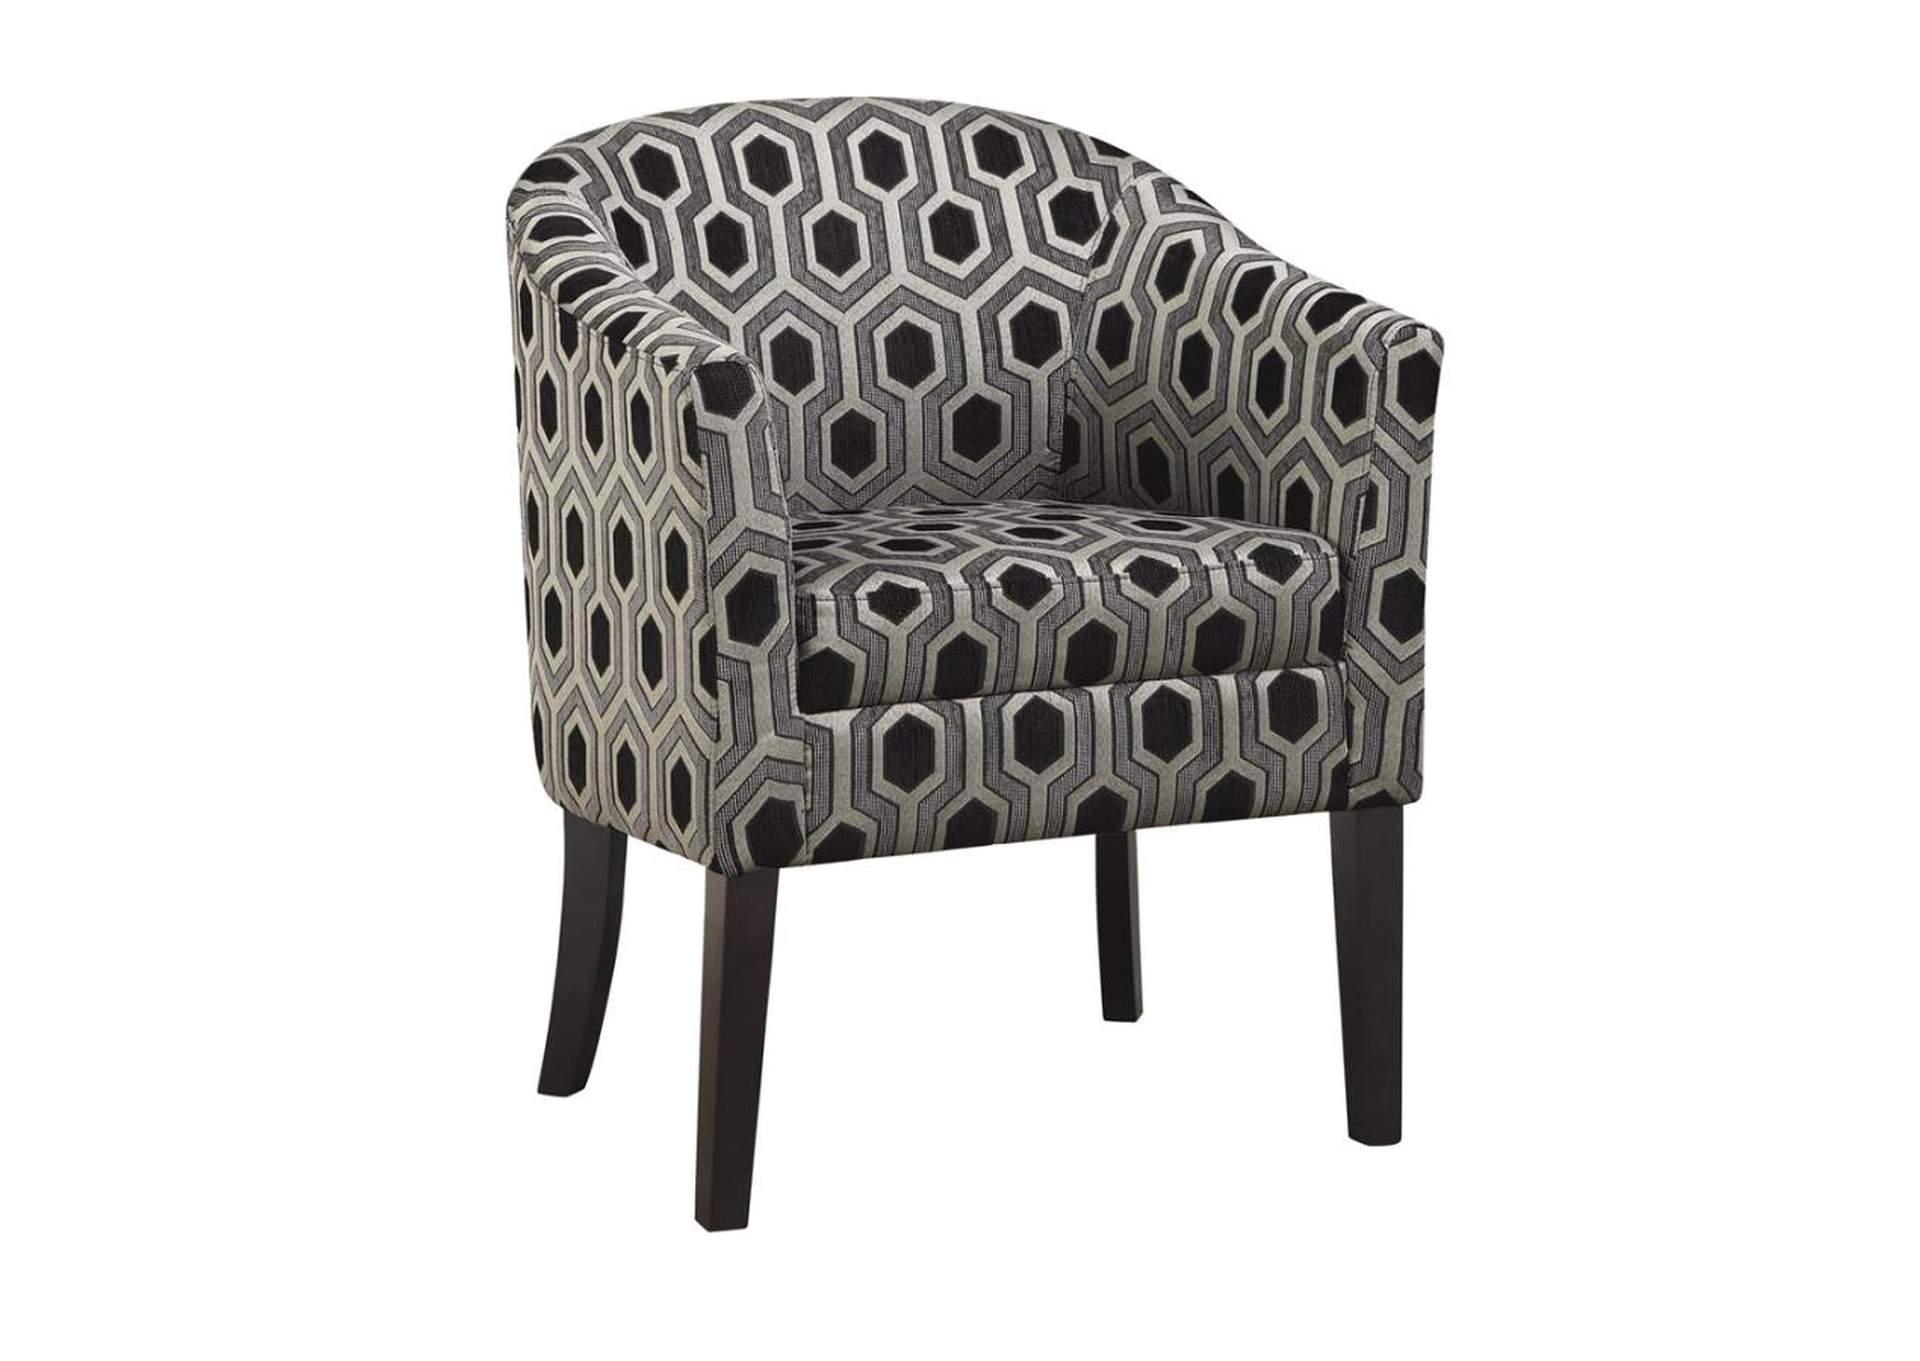 Jansen Hexagon Patterned Accent Chair Grey And Black,Coaster Furniture